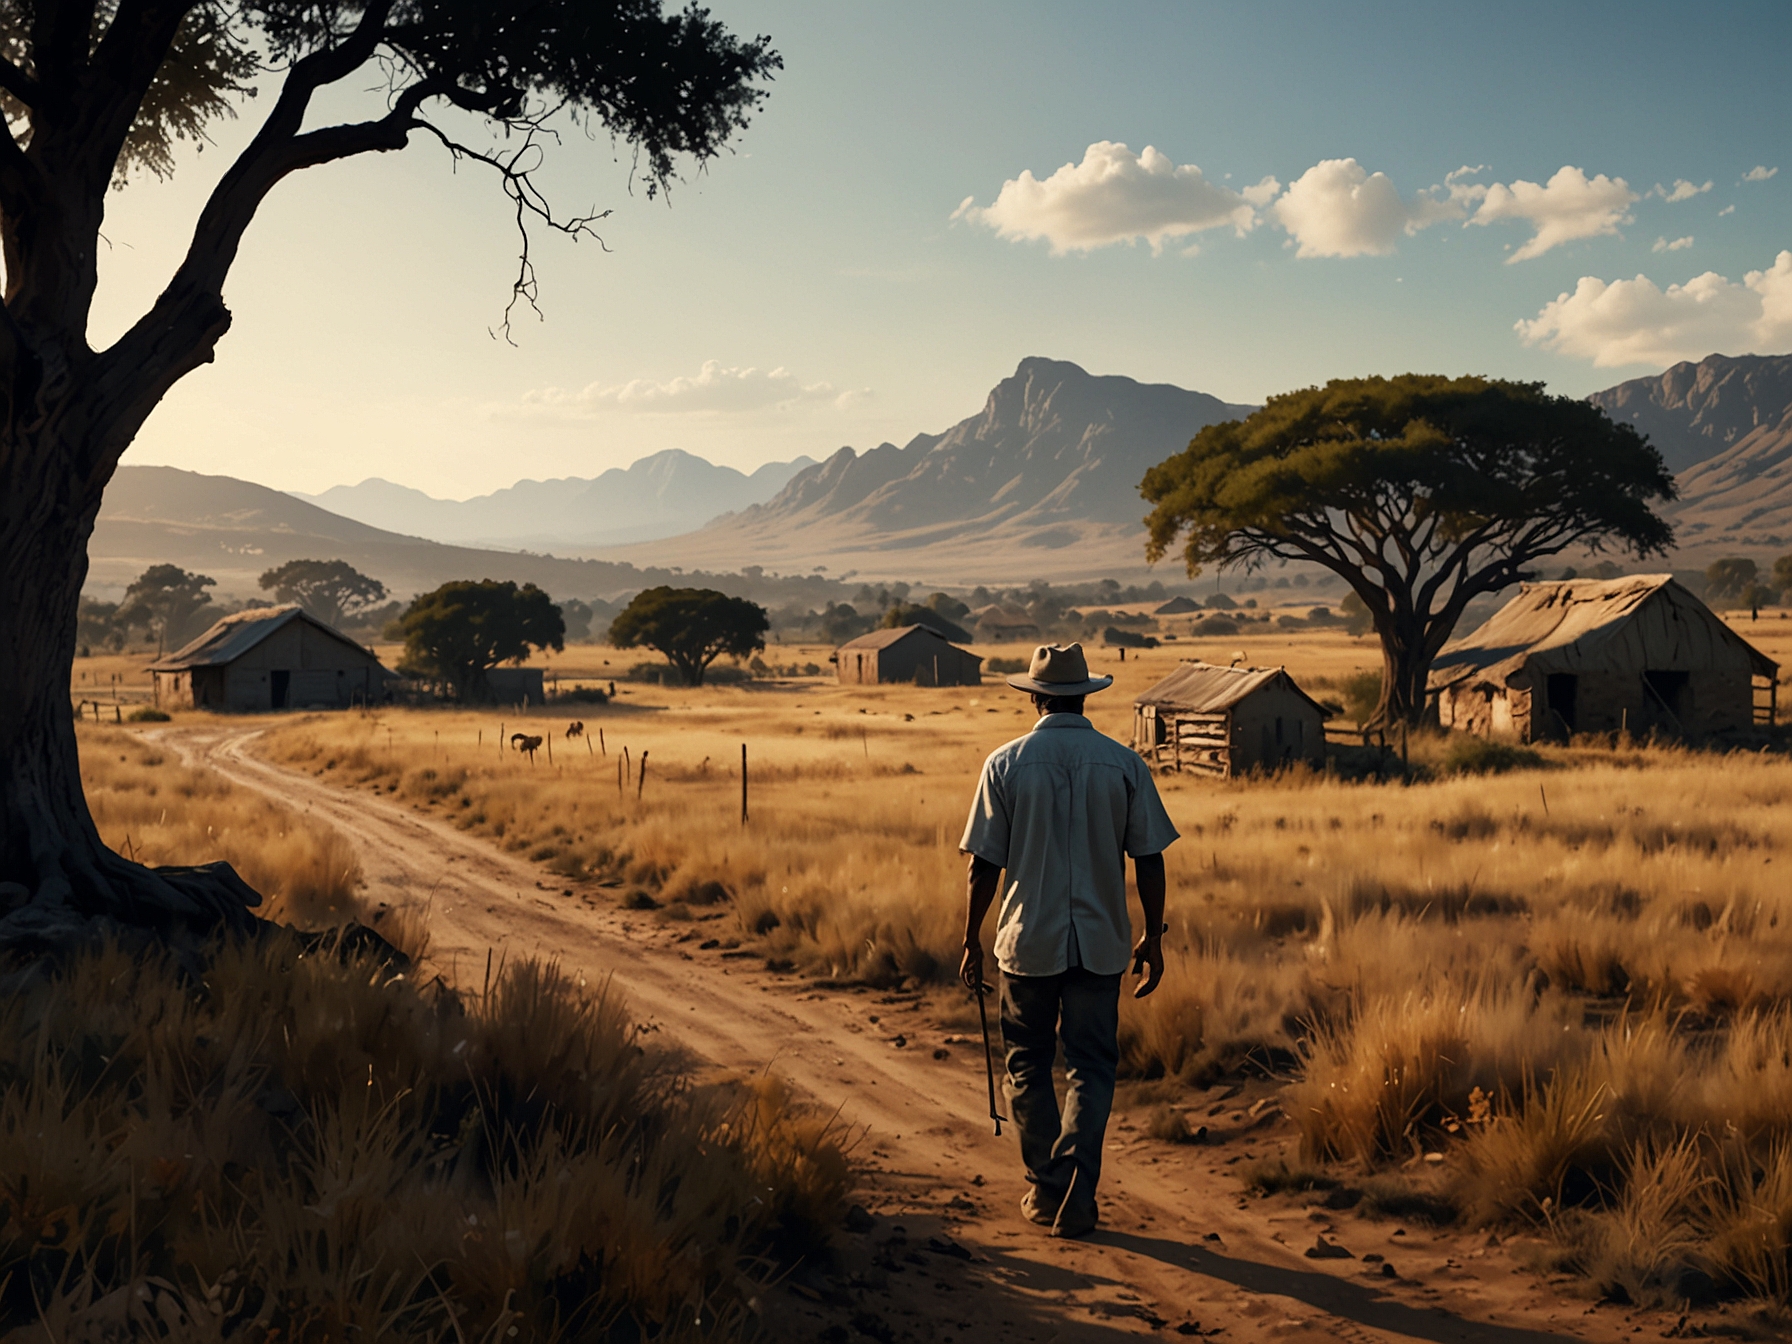 A picturesque South African countryside setting in Lobola Man, highlighting the beautiful landscapes that add depth to the romantic journey of the protagonist.